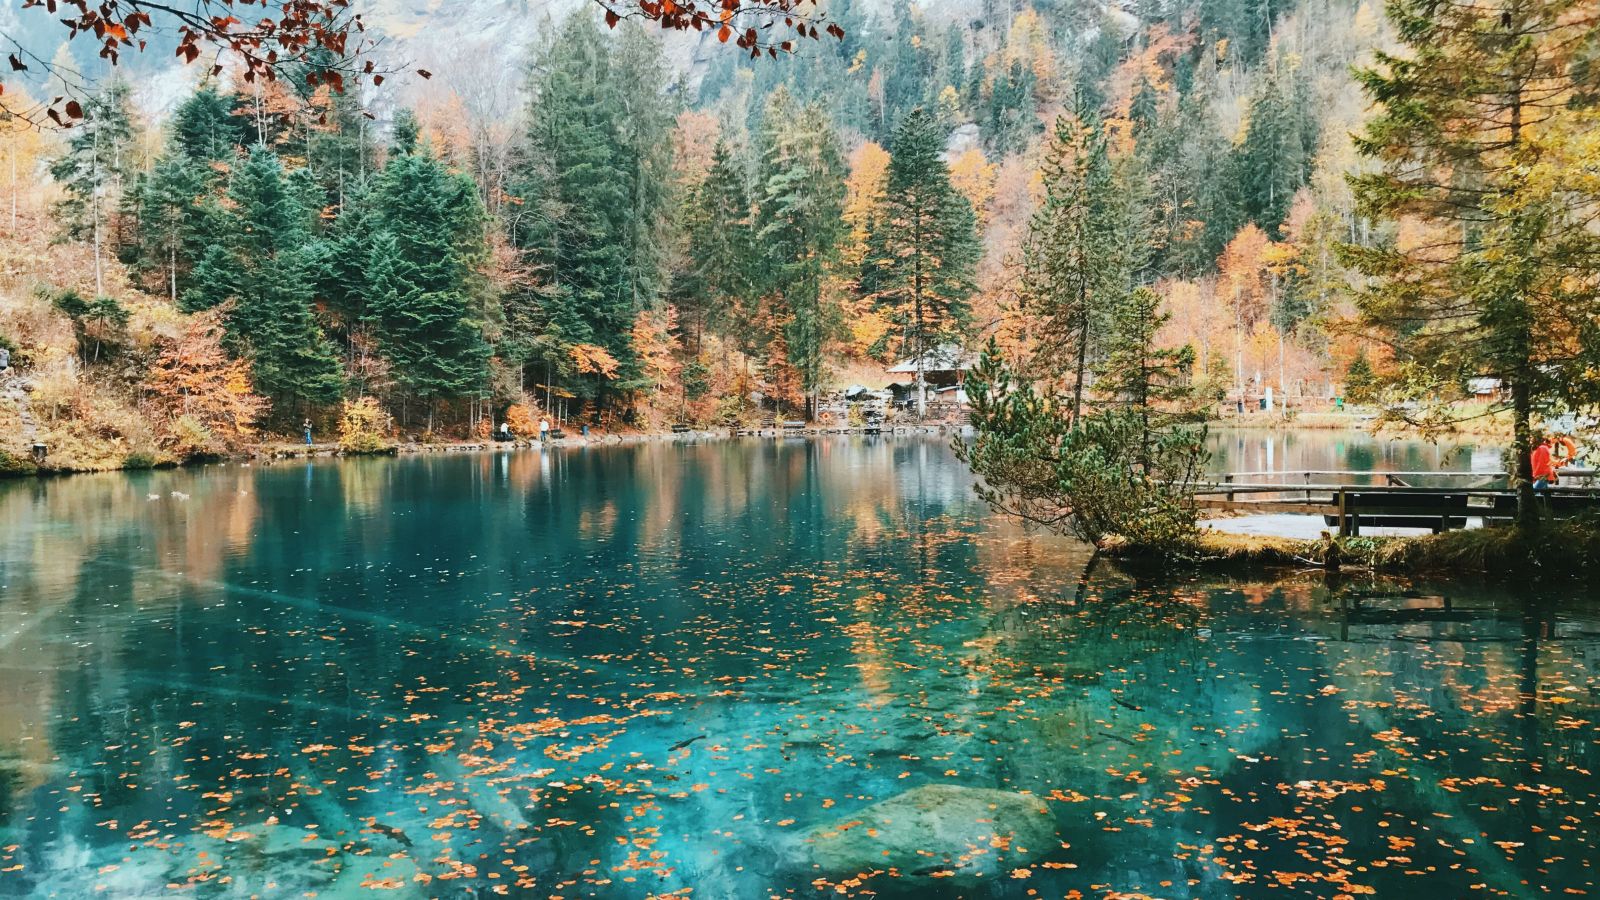 Scenic vista of clear mountain lake with fallen leaves floating on the surface – An autumn afternoon in Blausee (Blue lake) - Switzerland. Taken by an exchange student, Alisha Vu who attended Bocconi University. Scenic vista of a clear mountain lake with fallen leaves floating on the surface.